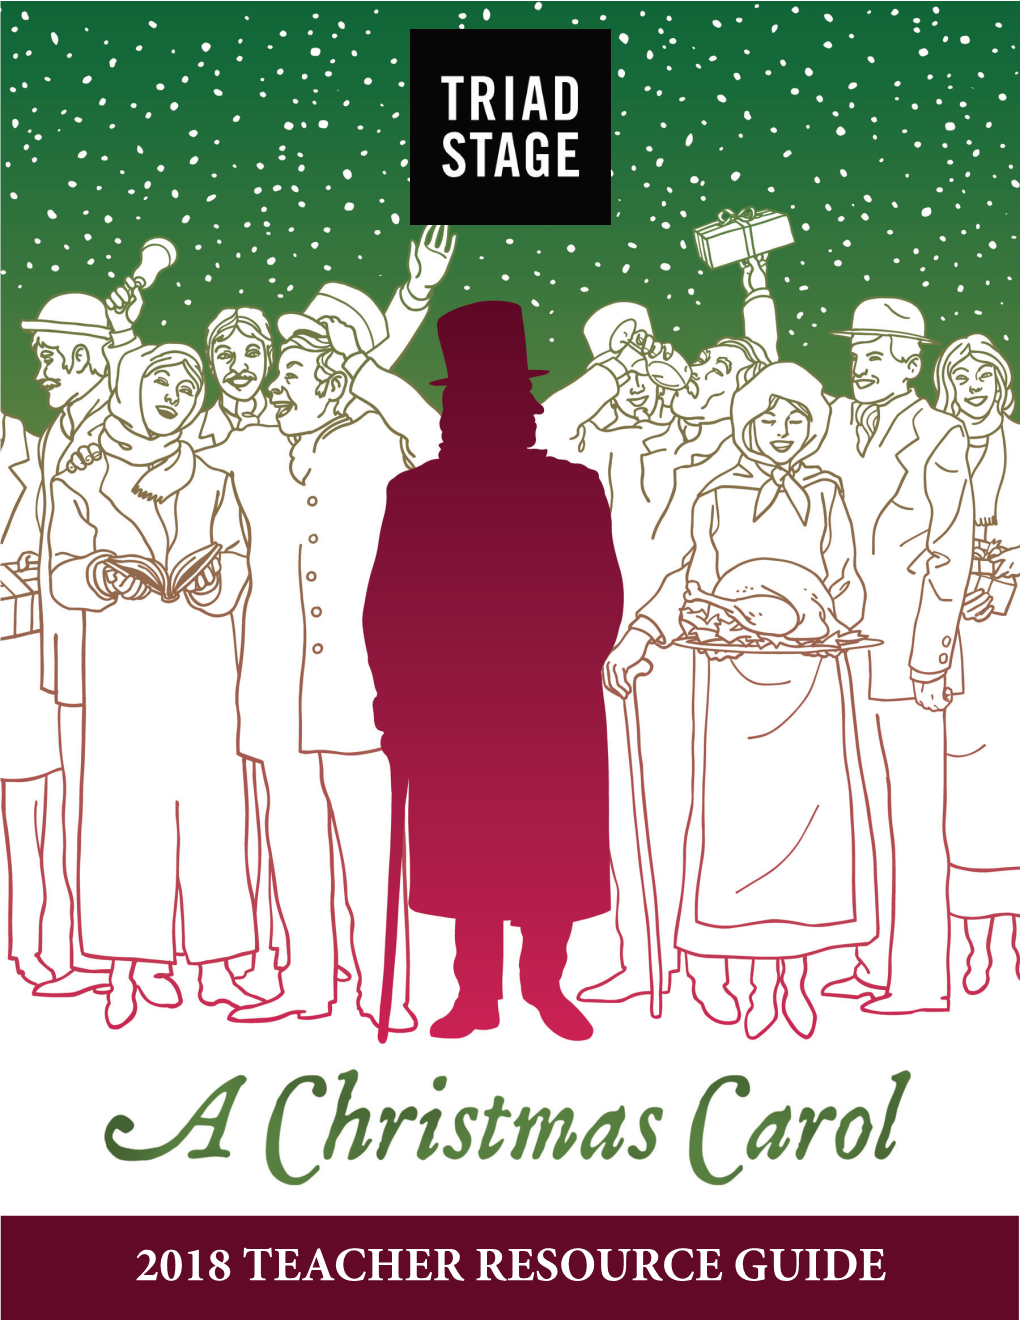 A Christmas Carol Resource Guide About the Story